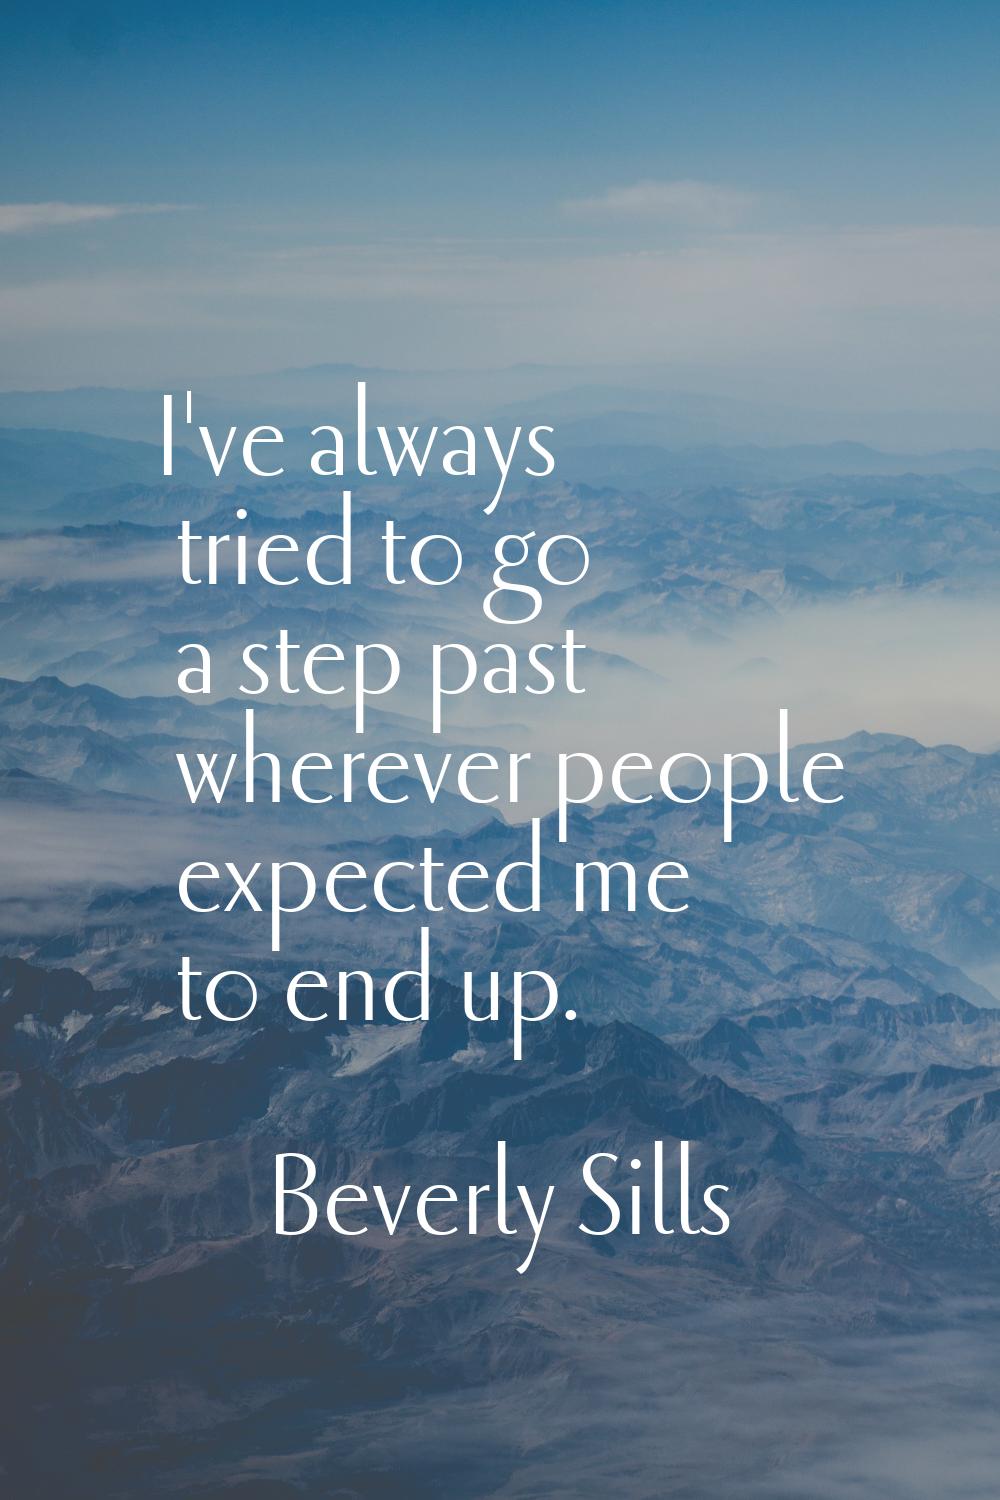 I've always tried to go a step past wherever people expected me to end up.